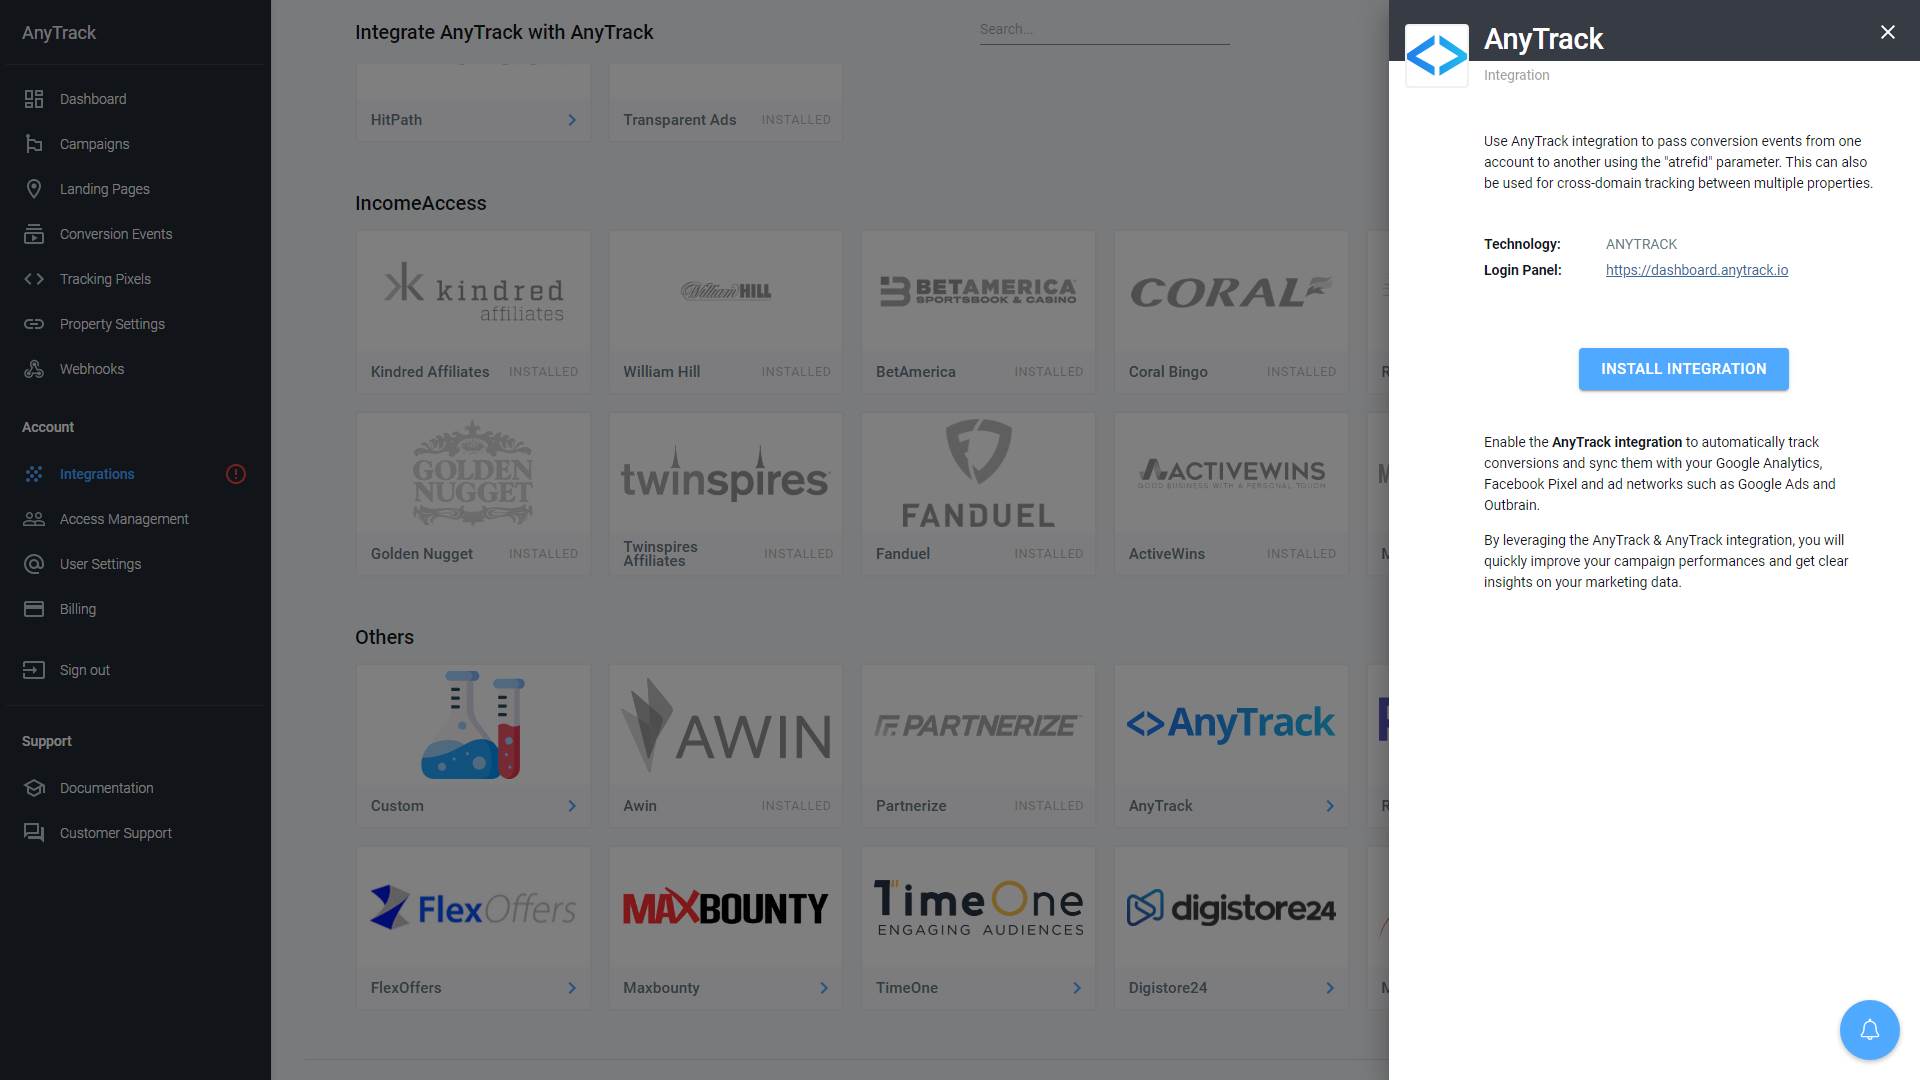 AnyTrack Integration Page